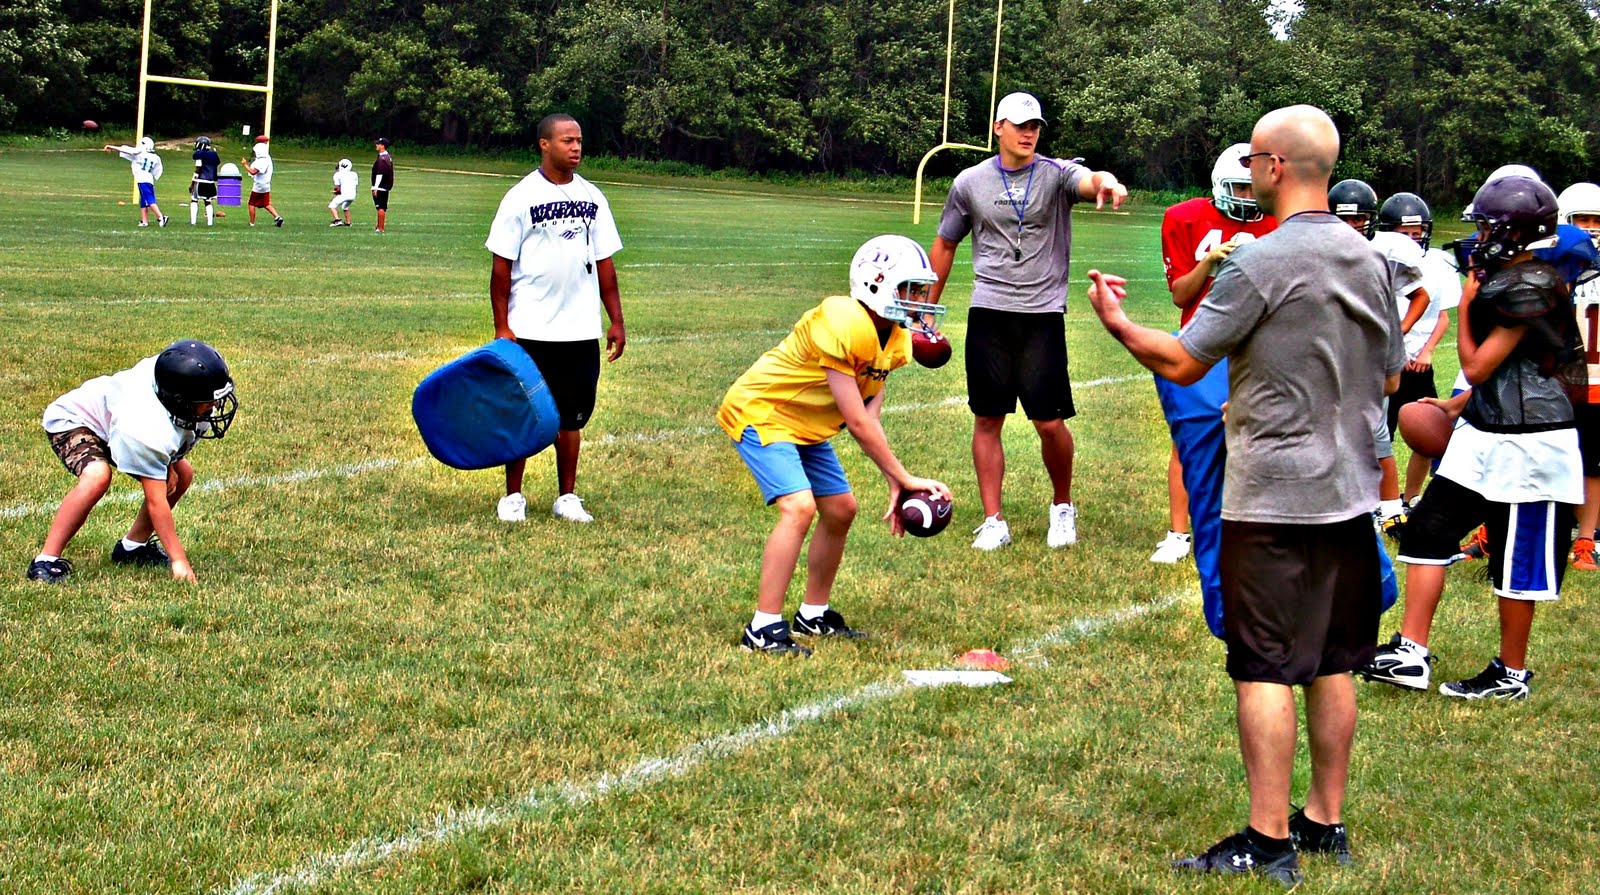 Voice's Eye on Football Blog Warhawk Youth Football Camp takes place